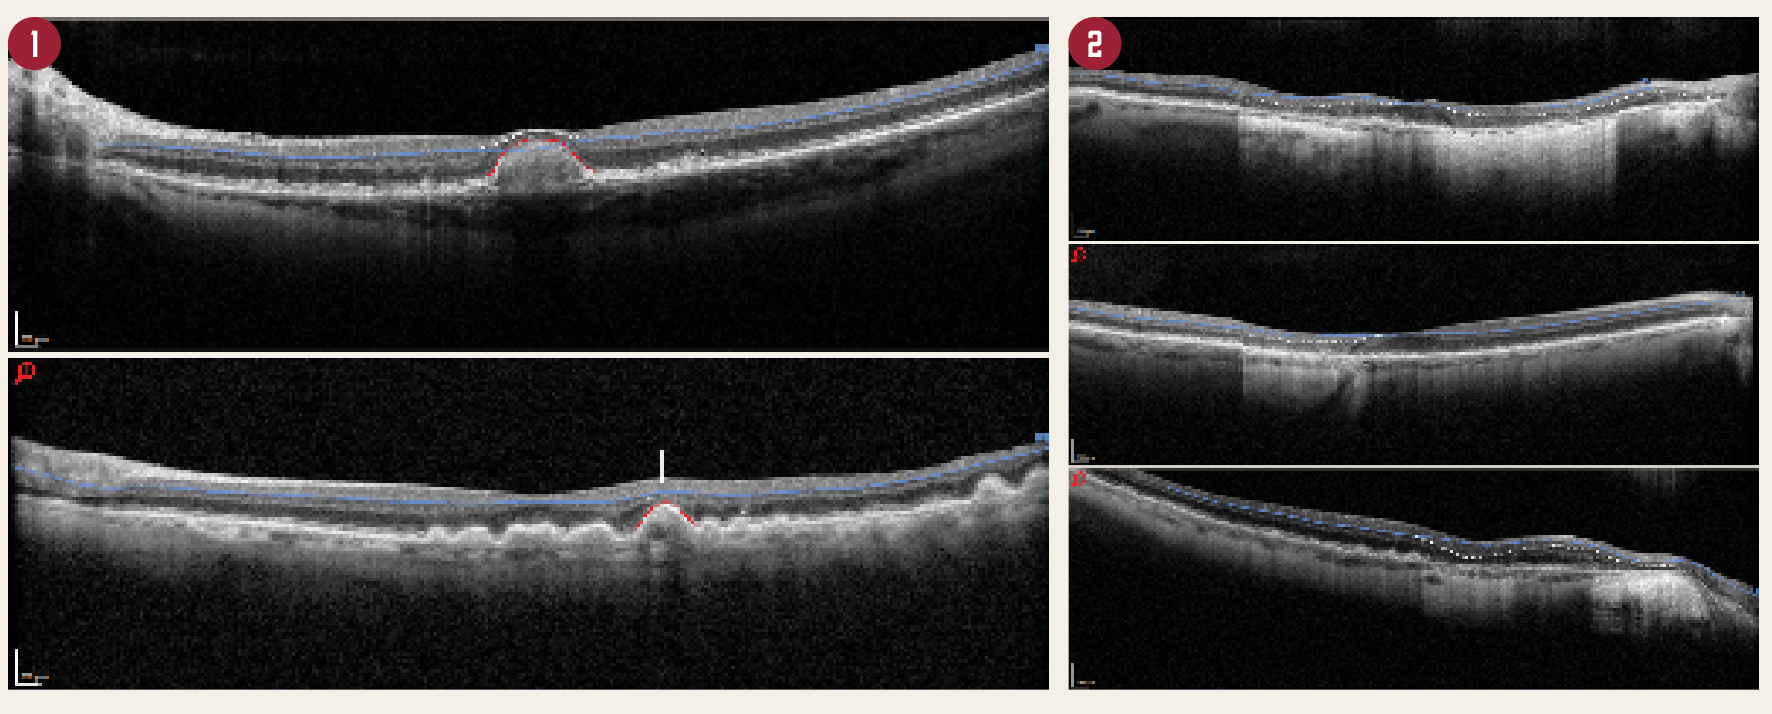 Effect of drusen and atrophy in dry AMD on automated segmentation in OCT images 